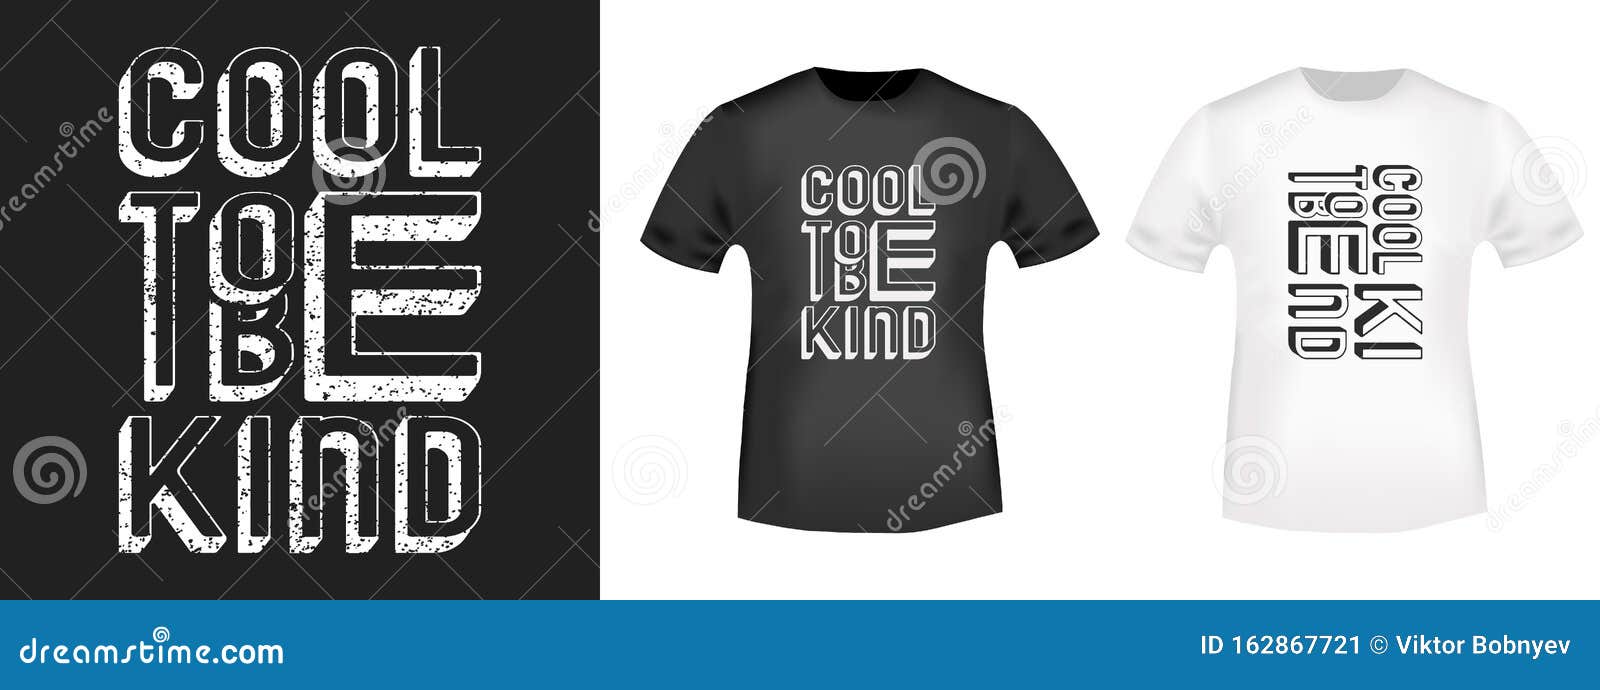 cool to be kind t-shirt print stamp for tee, t shirts applique, fashion slogan, badge, label clothing and casual wear